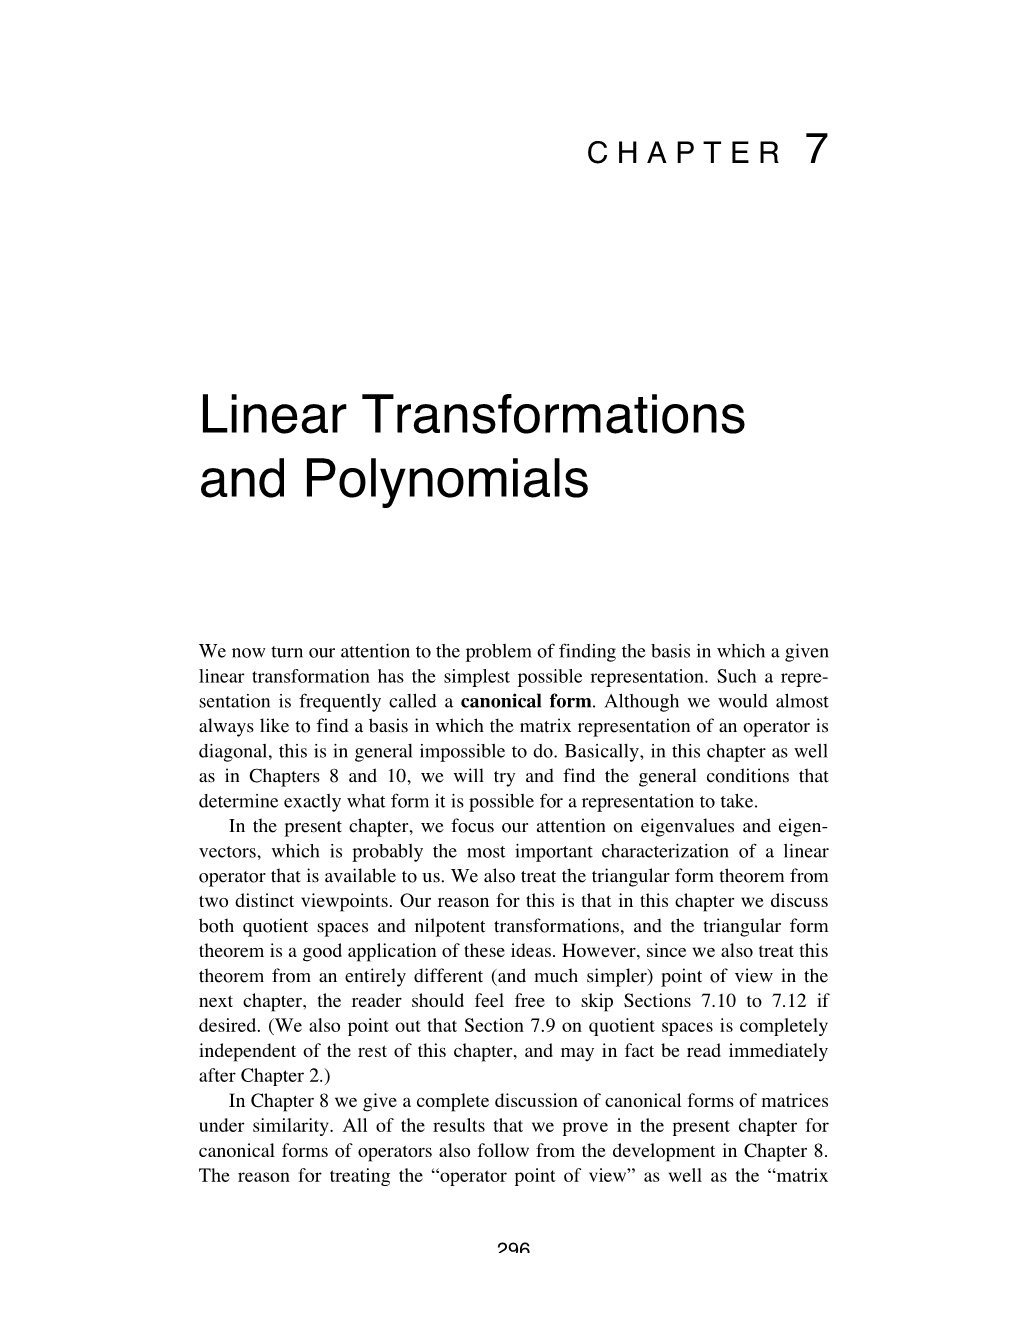 Linear Transformations and Polynomials